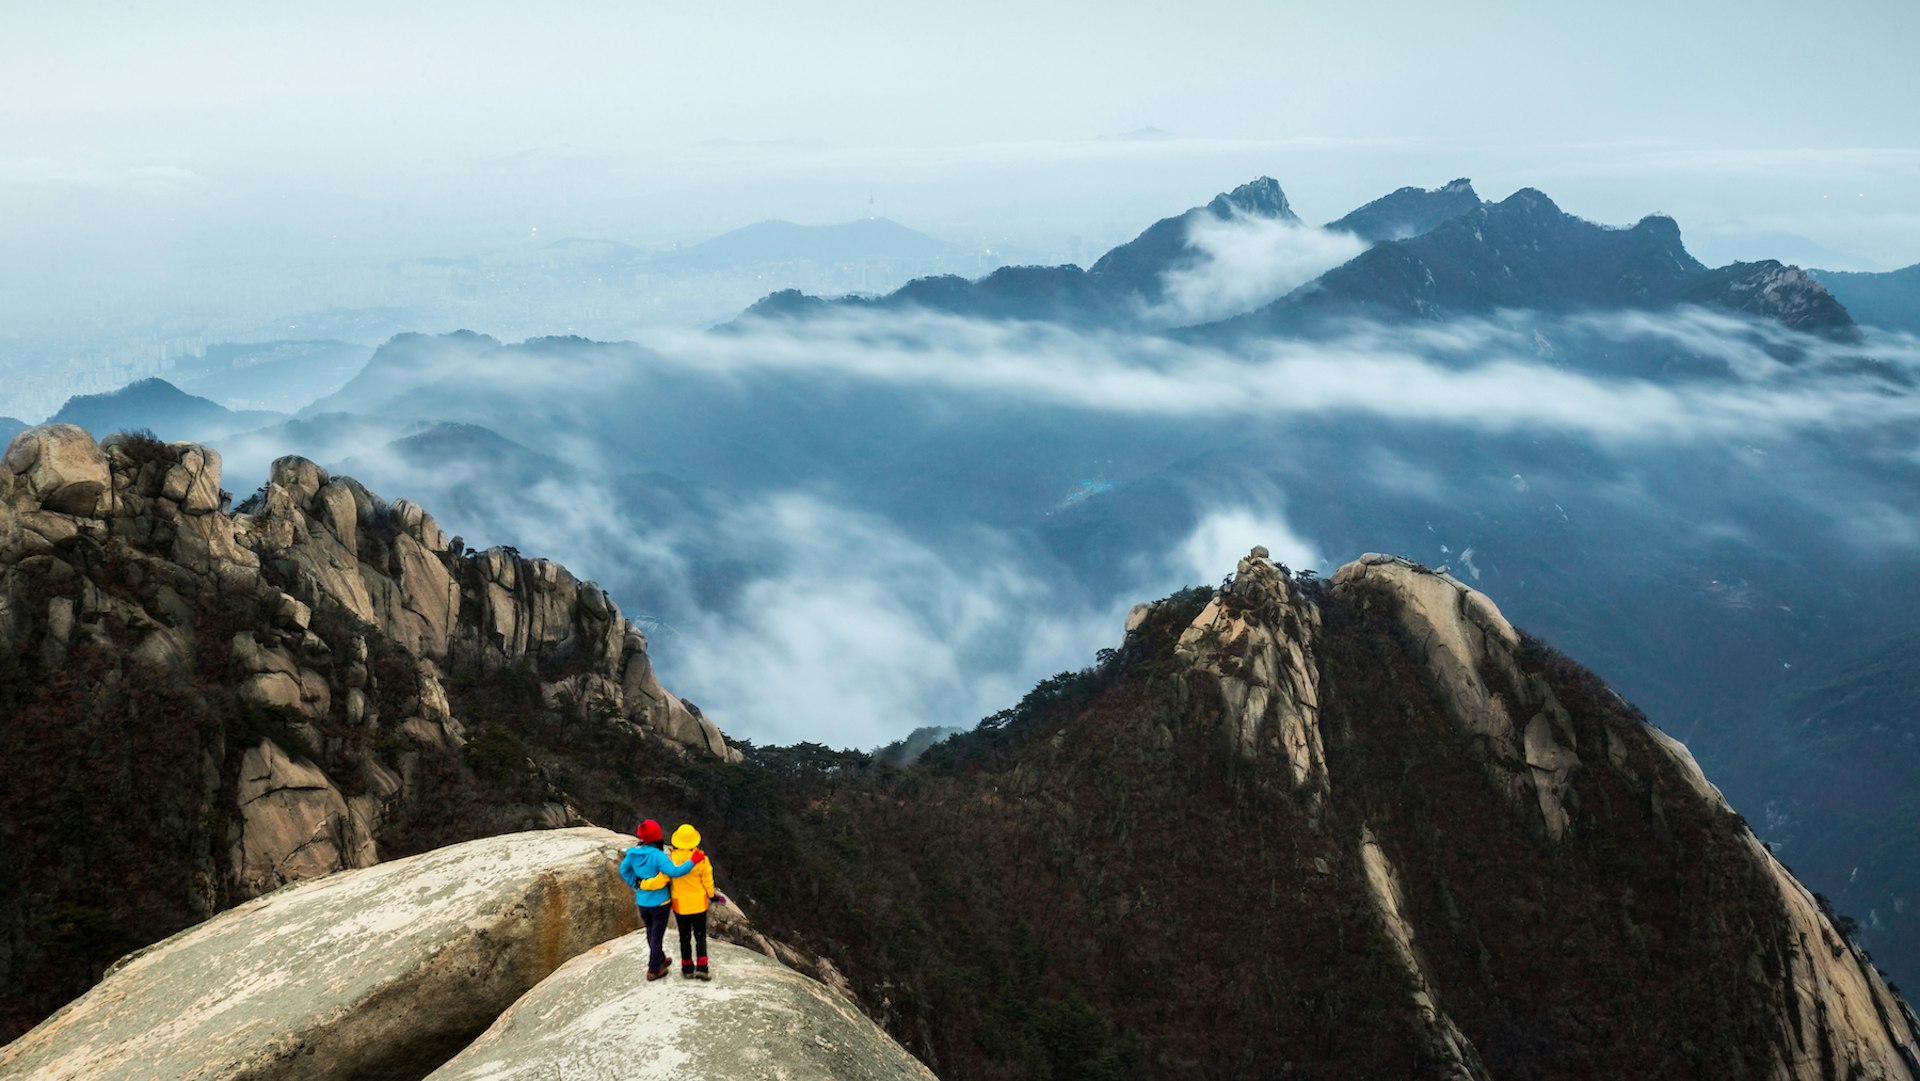 An aerial view of two hikers on a rocky outcrop overlooking cloudy mountain peaks at Bukhansan National Park, Seoul, South Korea